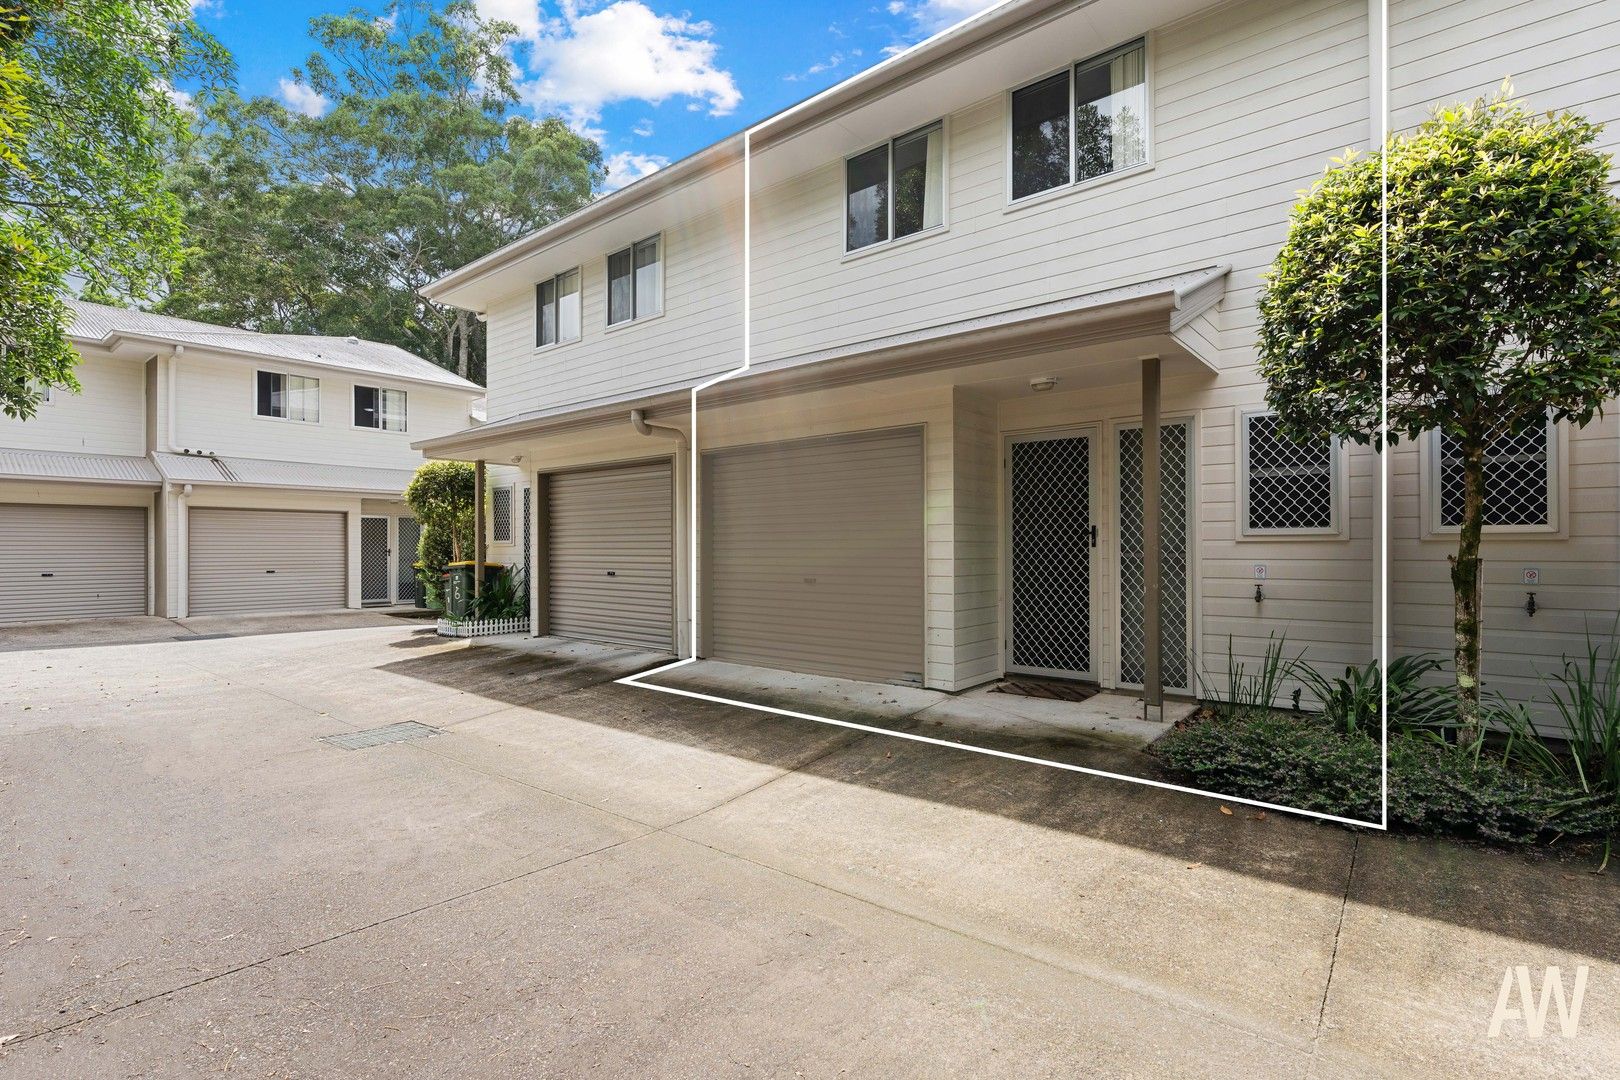 2 bedrooms Townhouse in 7/23 Alexandra Avenue NAMBOUR QLD, 4560